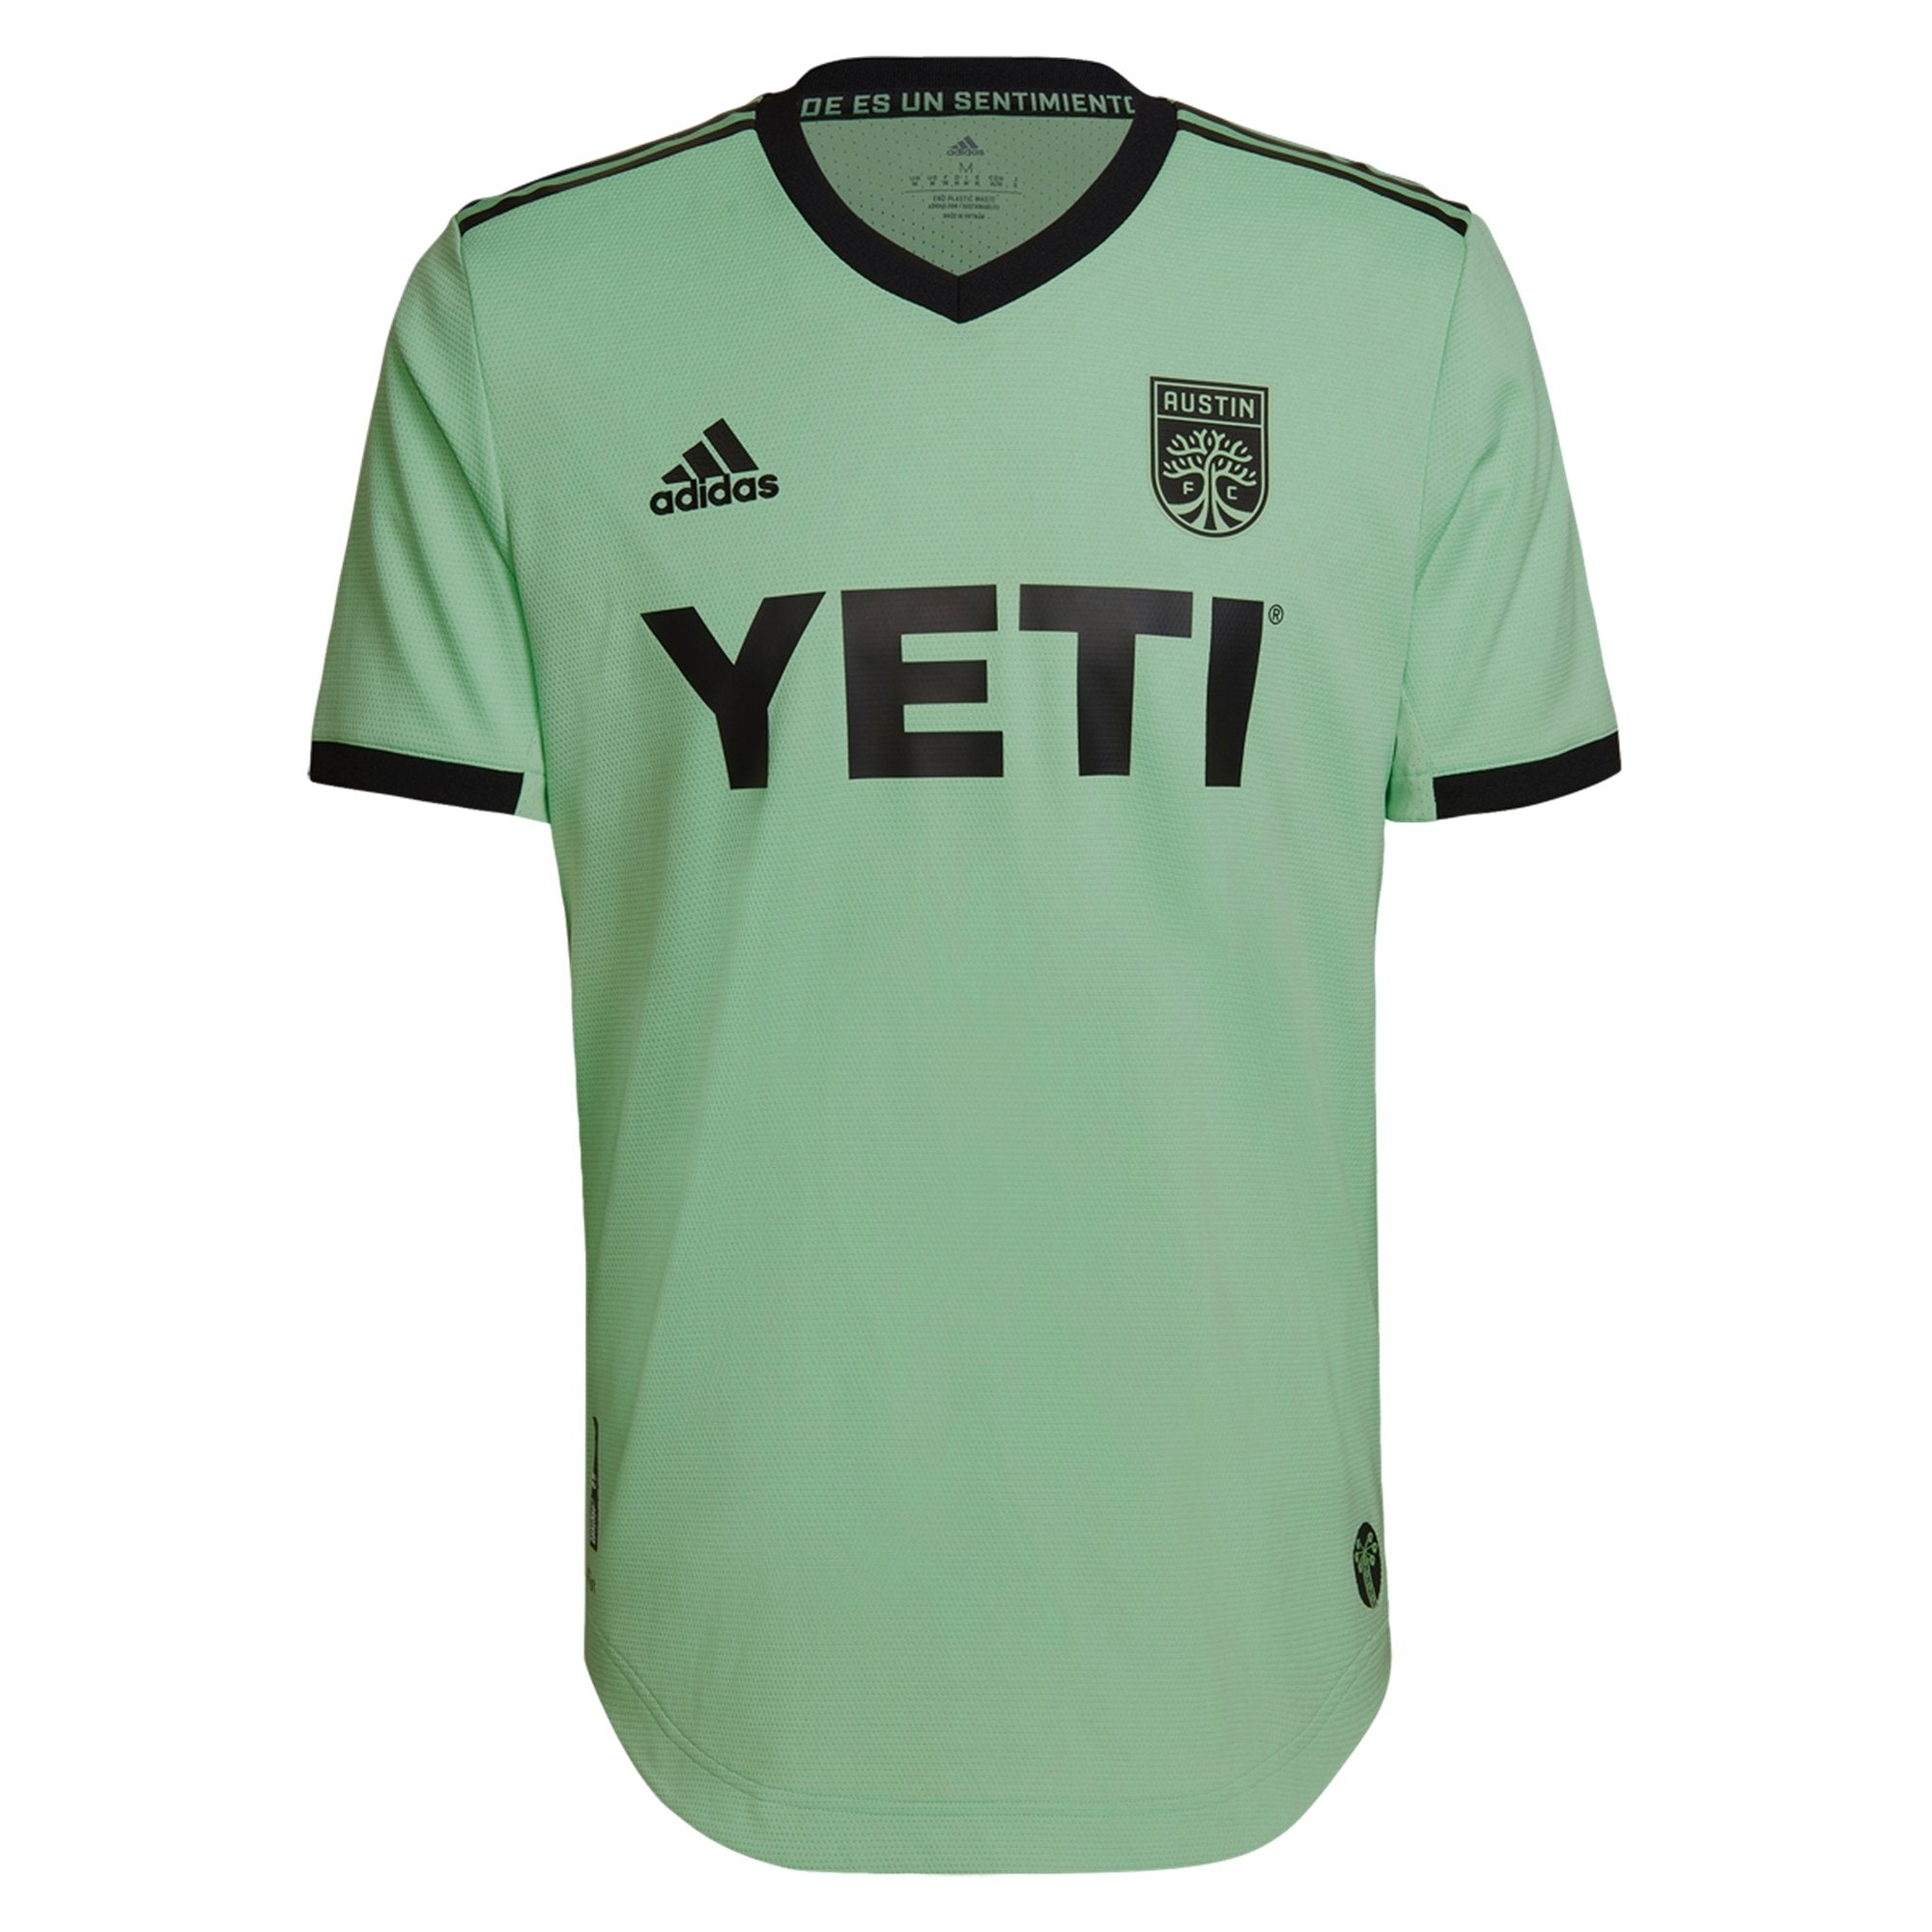 Adidas+MLS+JERSEY+AUTHENTIC+CHARLOTTE+FC+Soccer+JERSEY+sz+MENS+